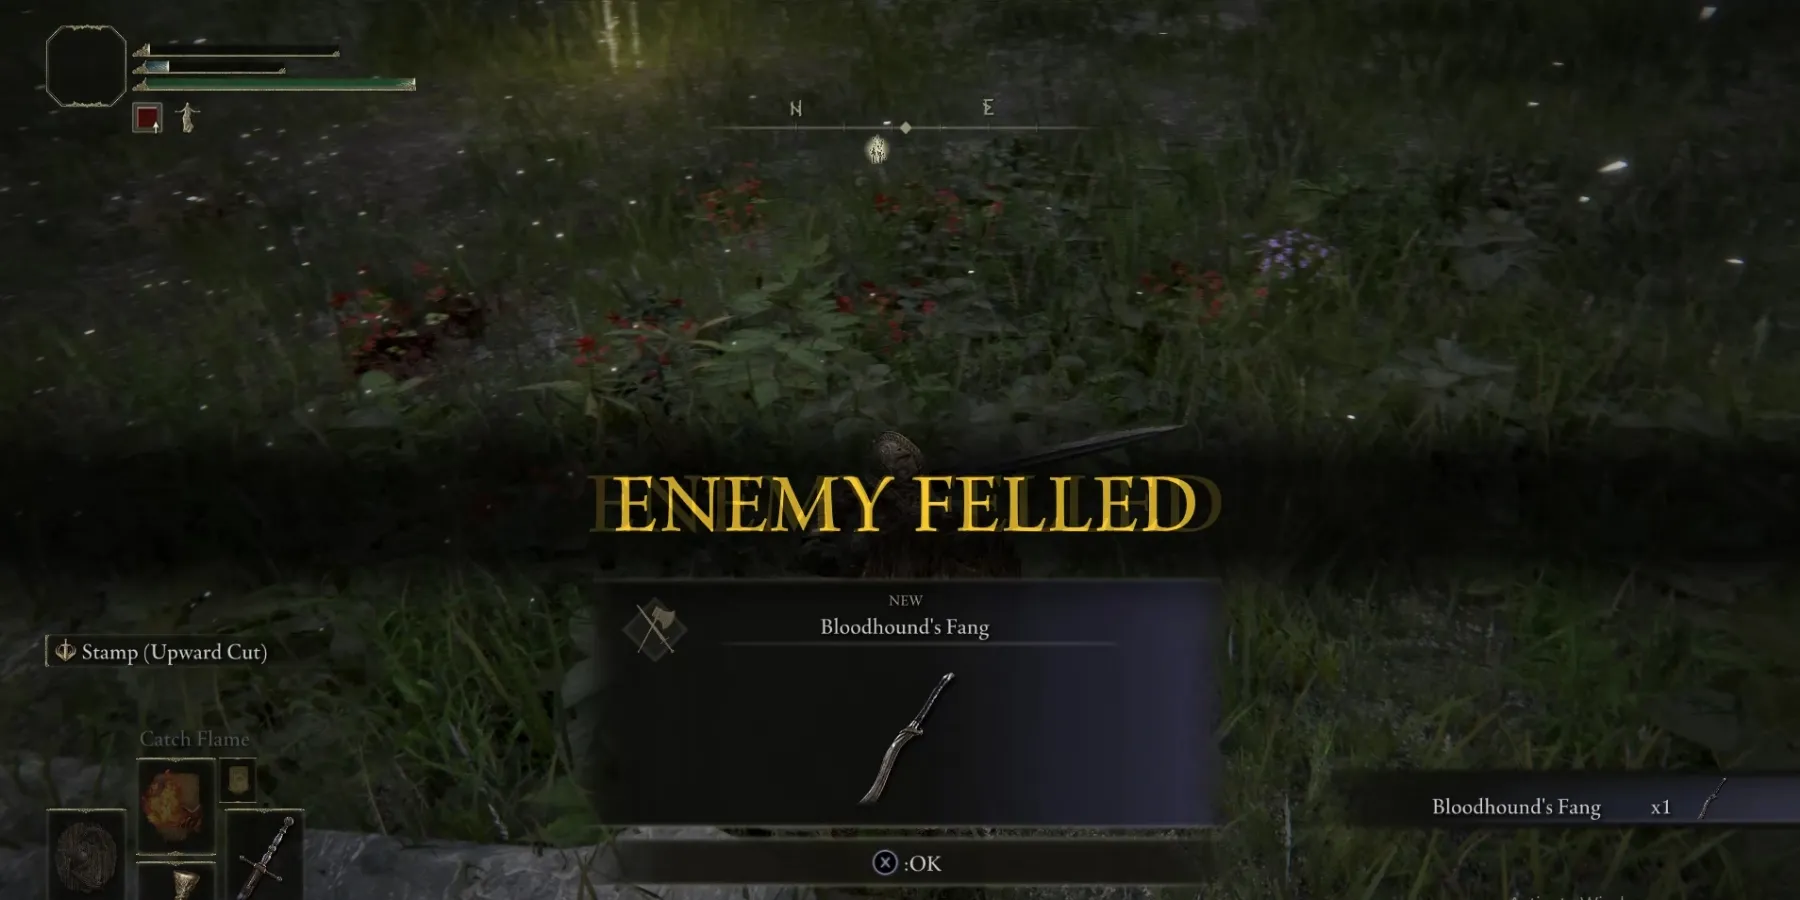 Obtaining the Bloodhound’s Fang in Elden Ring